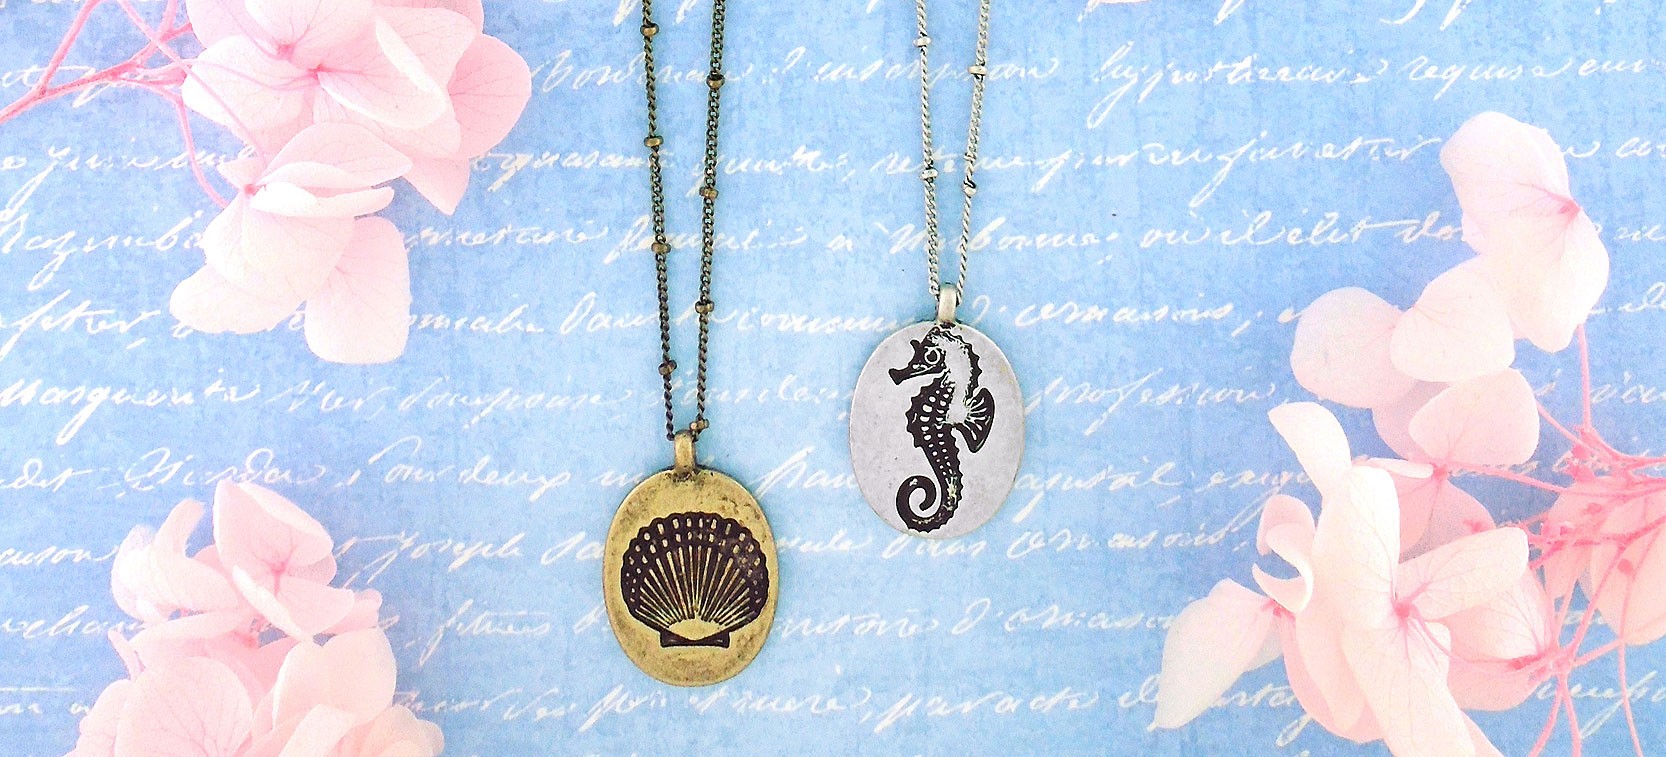 LAVISHY design and wholesale seahorse themed vegan accessories and gfits to gift shops, boutiques and book stores in Canada, USA and worldwide.